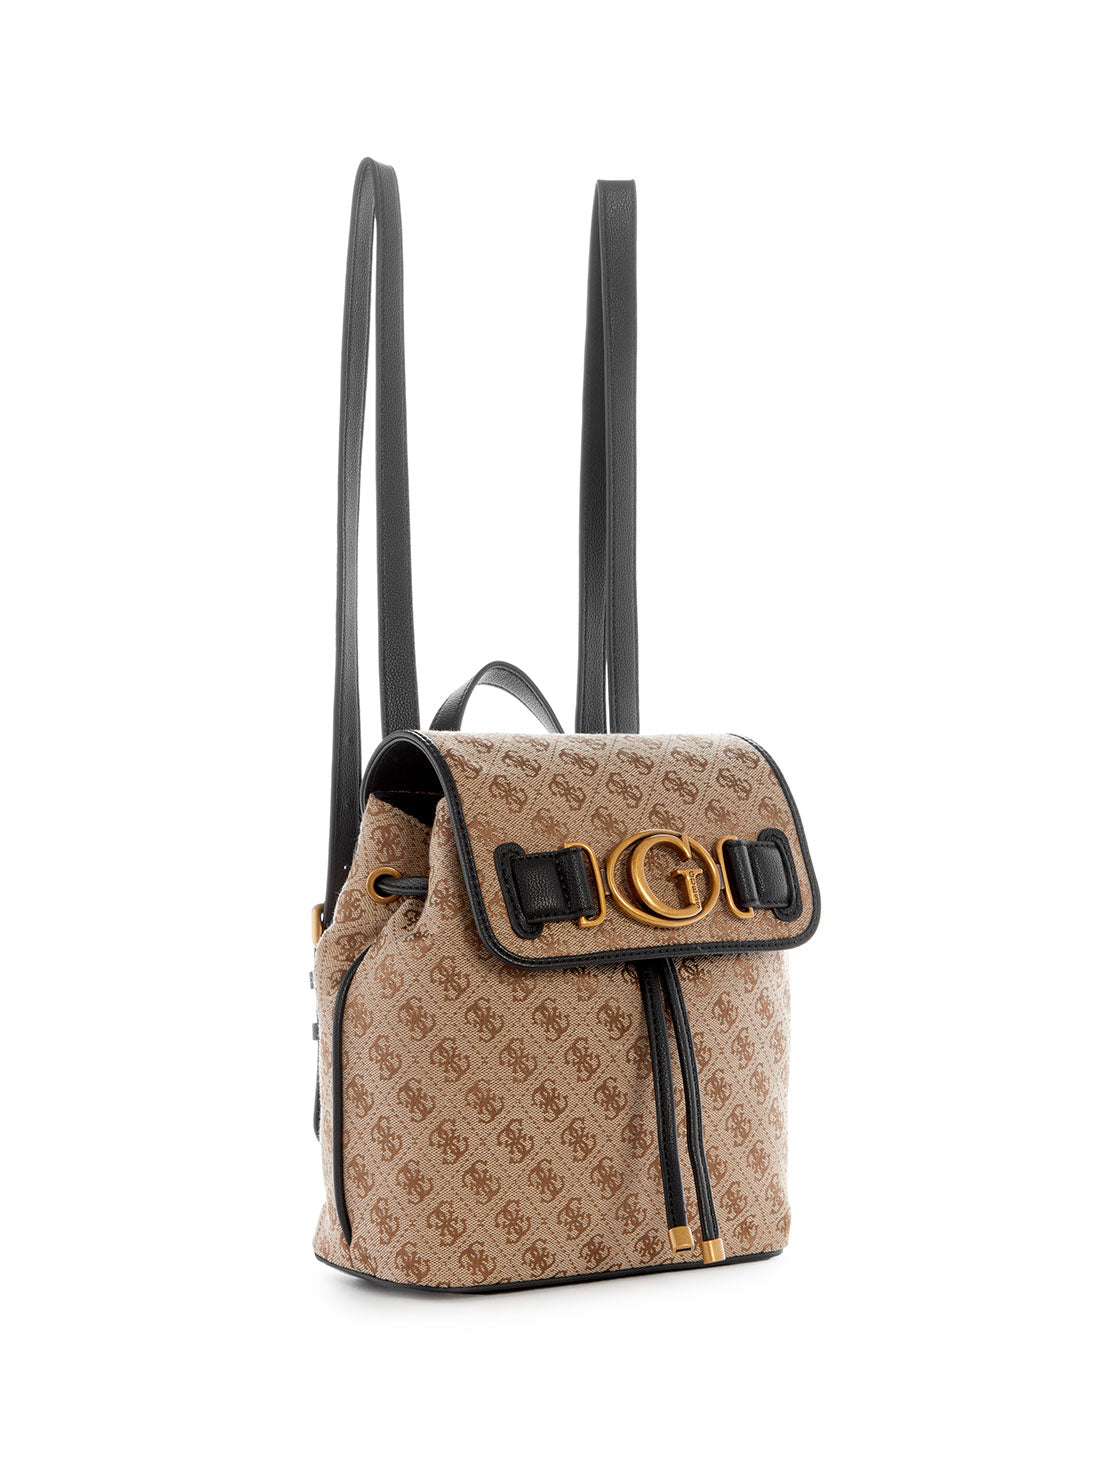 GUESS Womens Latte Brown Black Aviana Backpack side view